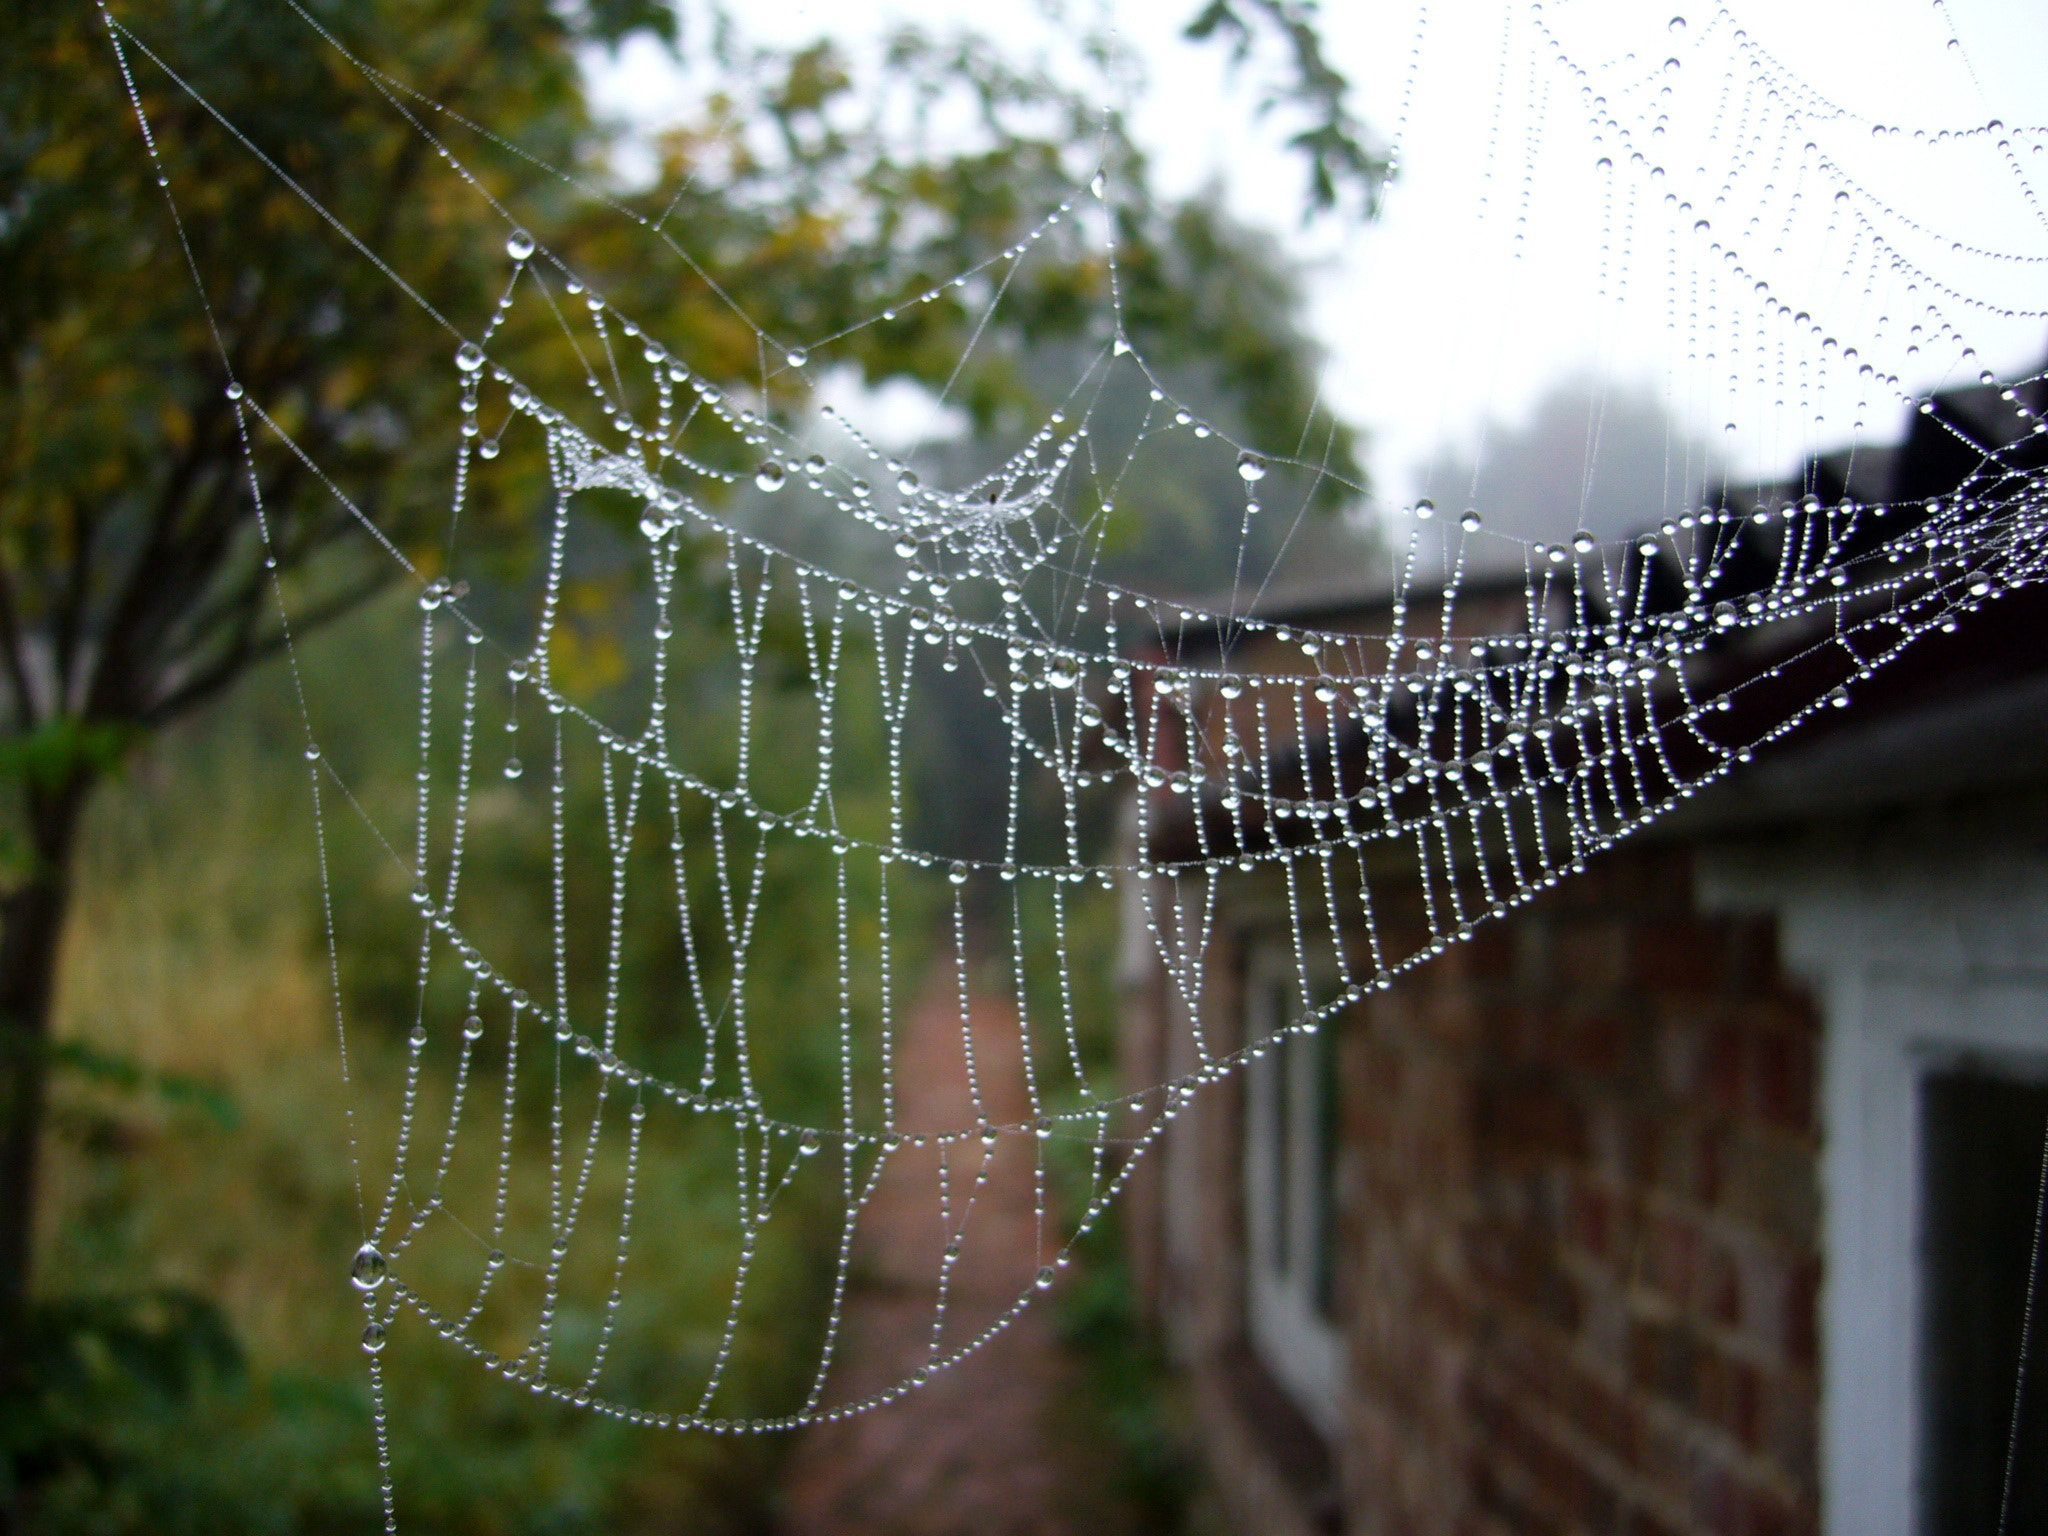 Panasonic DMC-FX9 sample photo. Spiders come out in the autumn photography